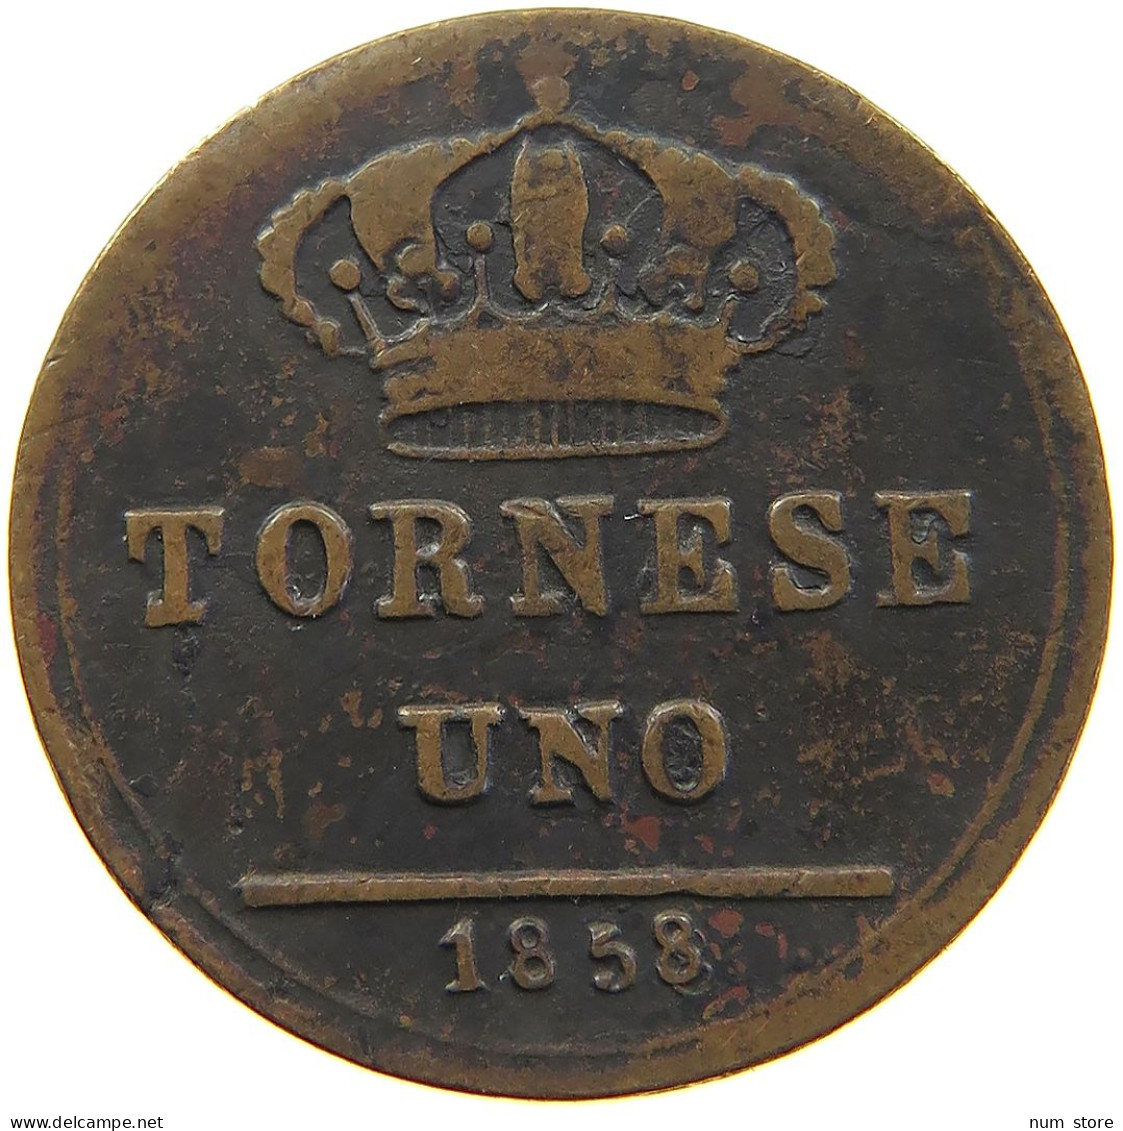 ITALY STATES TORNESE 1858 TWO SICILIES #s081 0587 - Two Sicilia